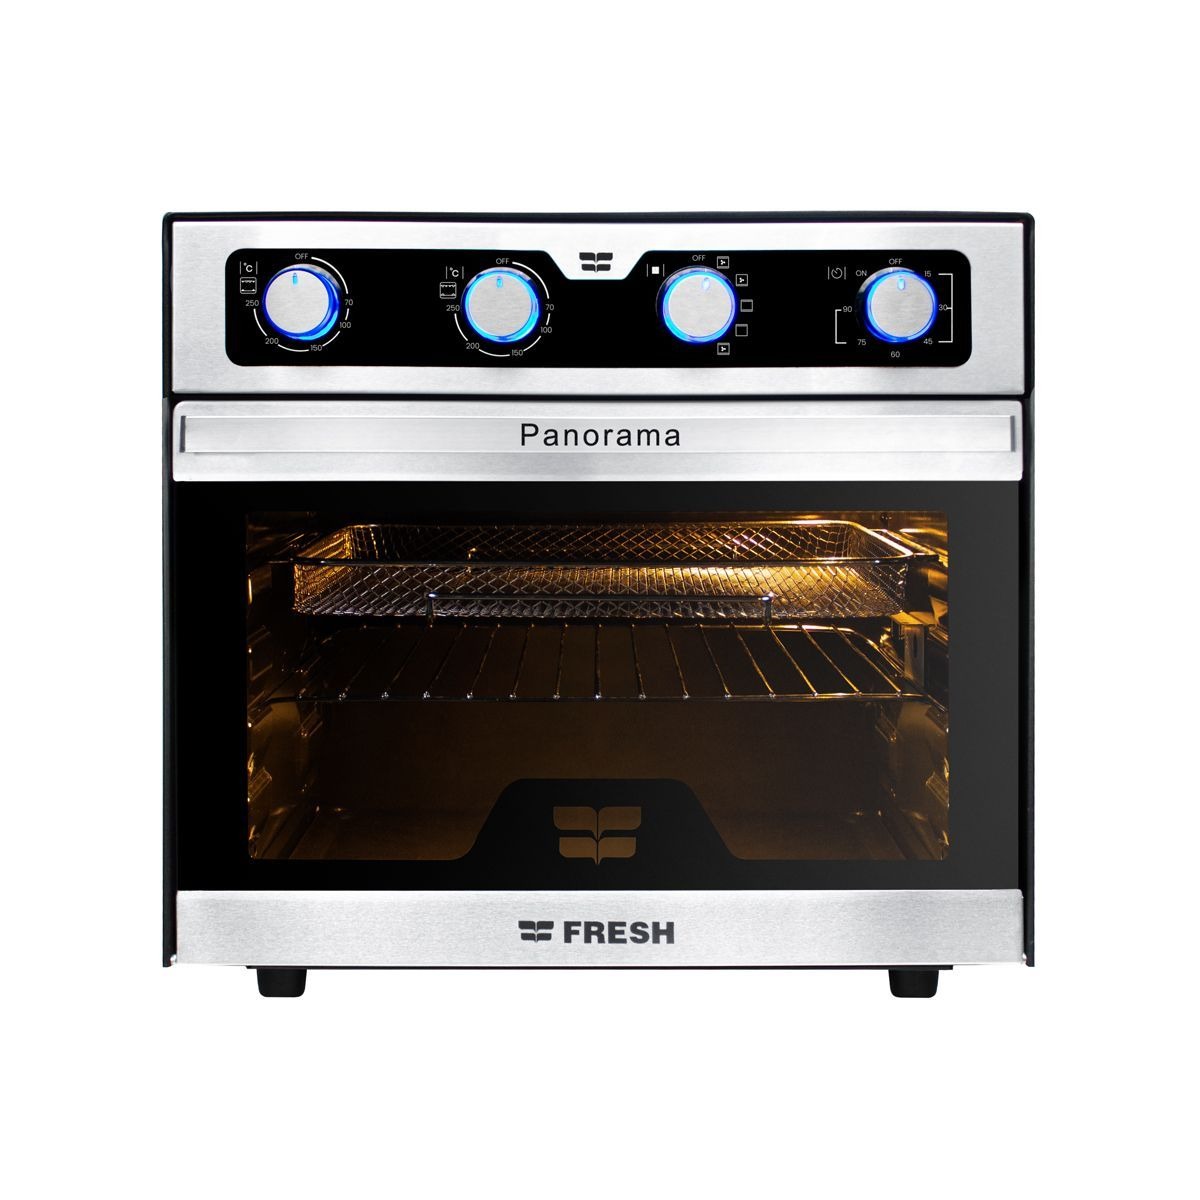 Fresh Panorama Oven with Air Fryer, 45 Liters, 2700W - Black